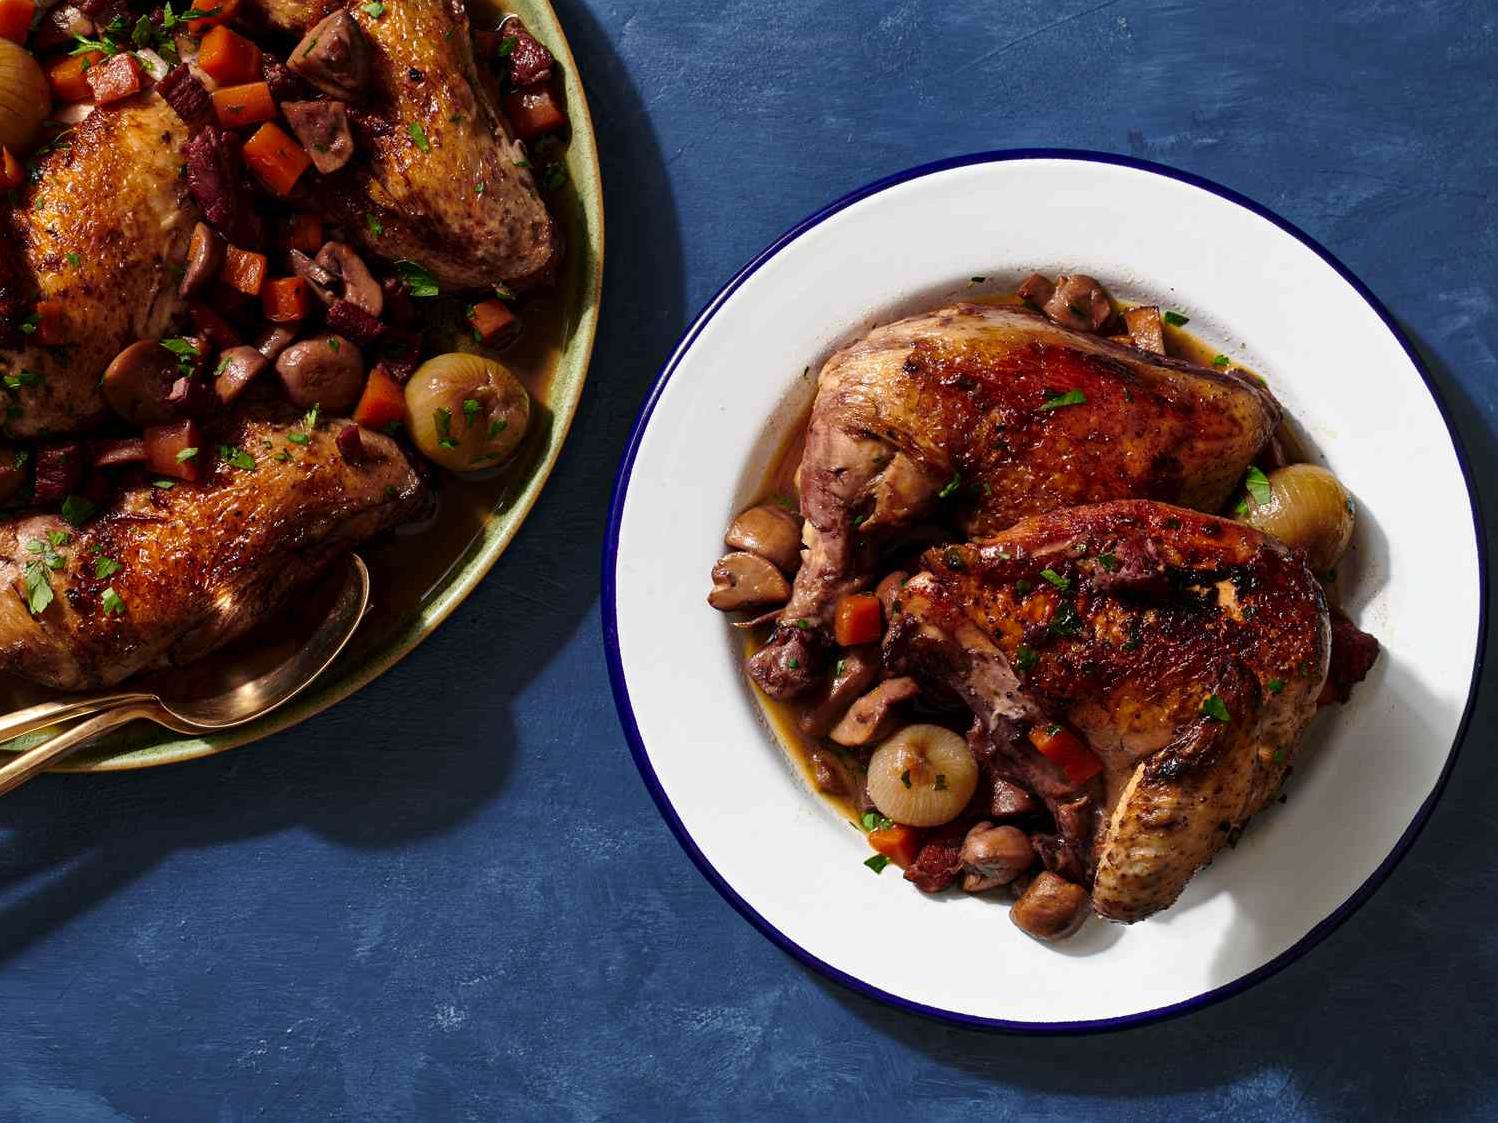  Ready for a comforting dish? This chicken braised in red wine recipe is just what you need!